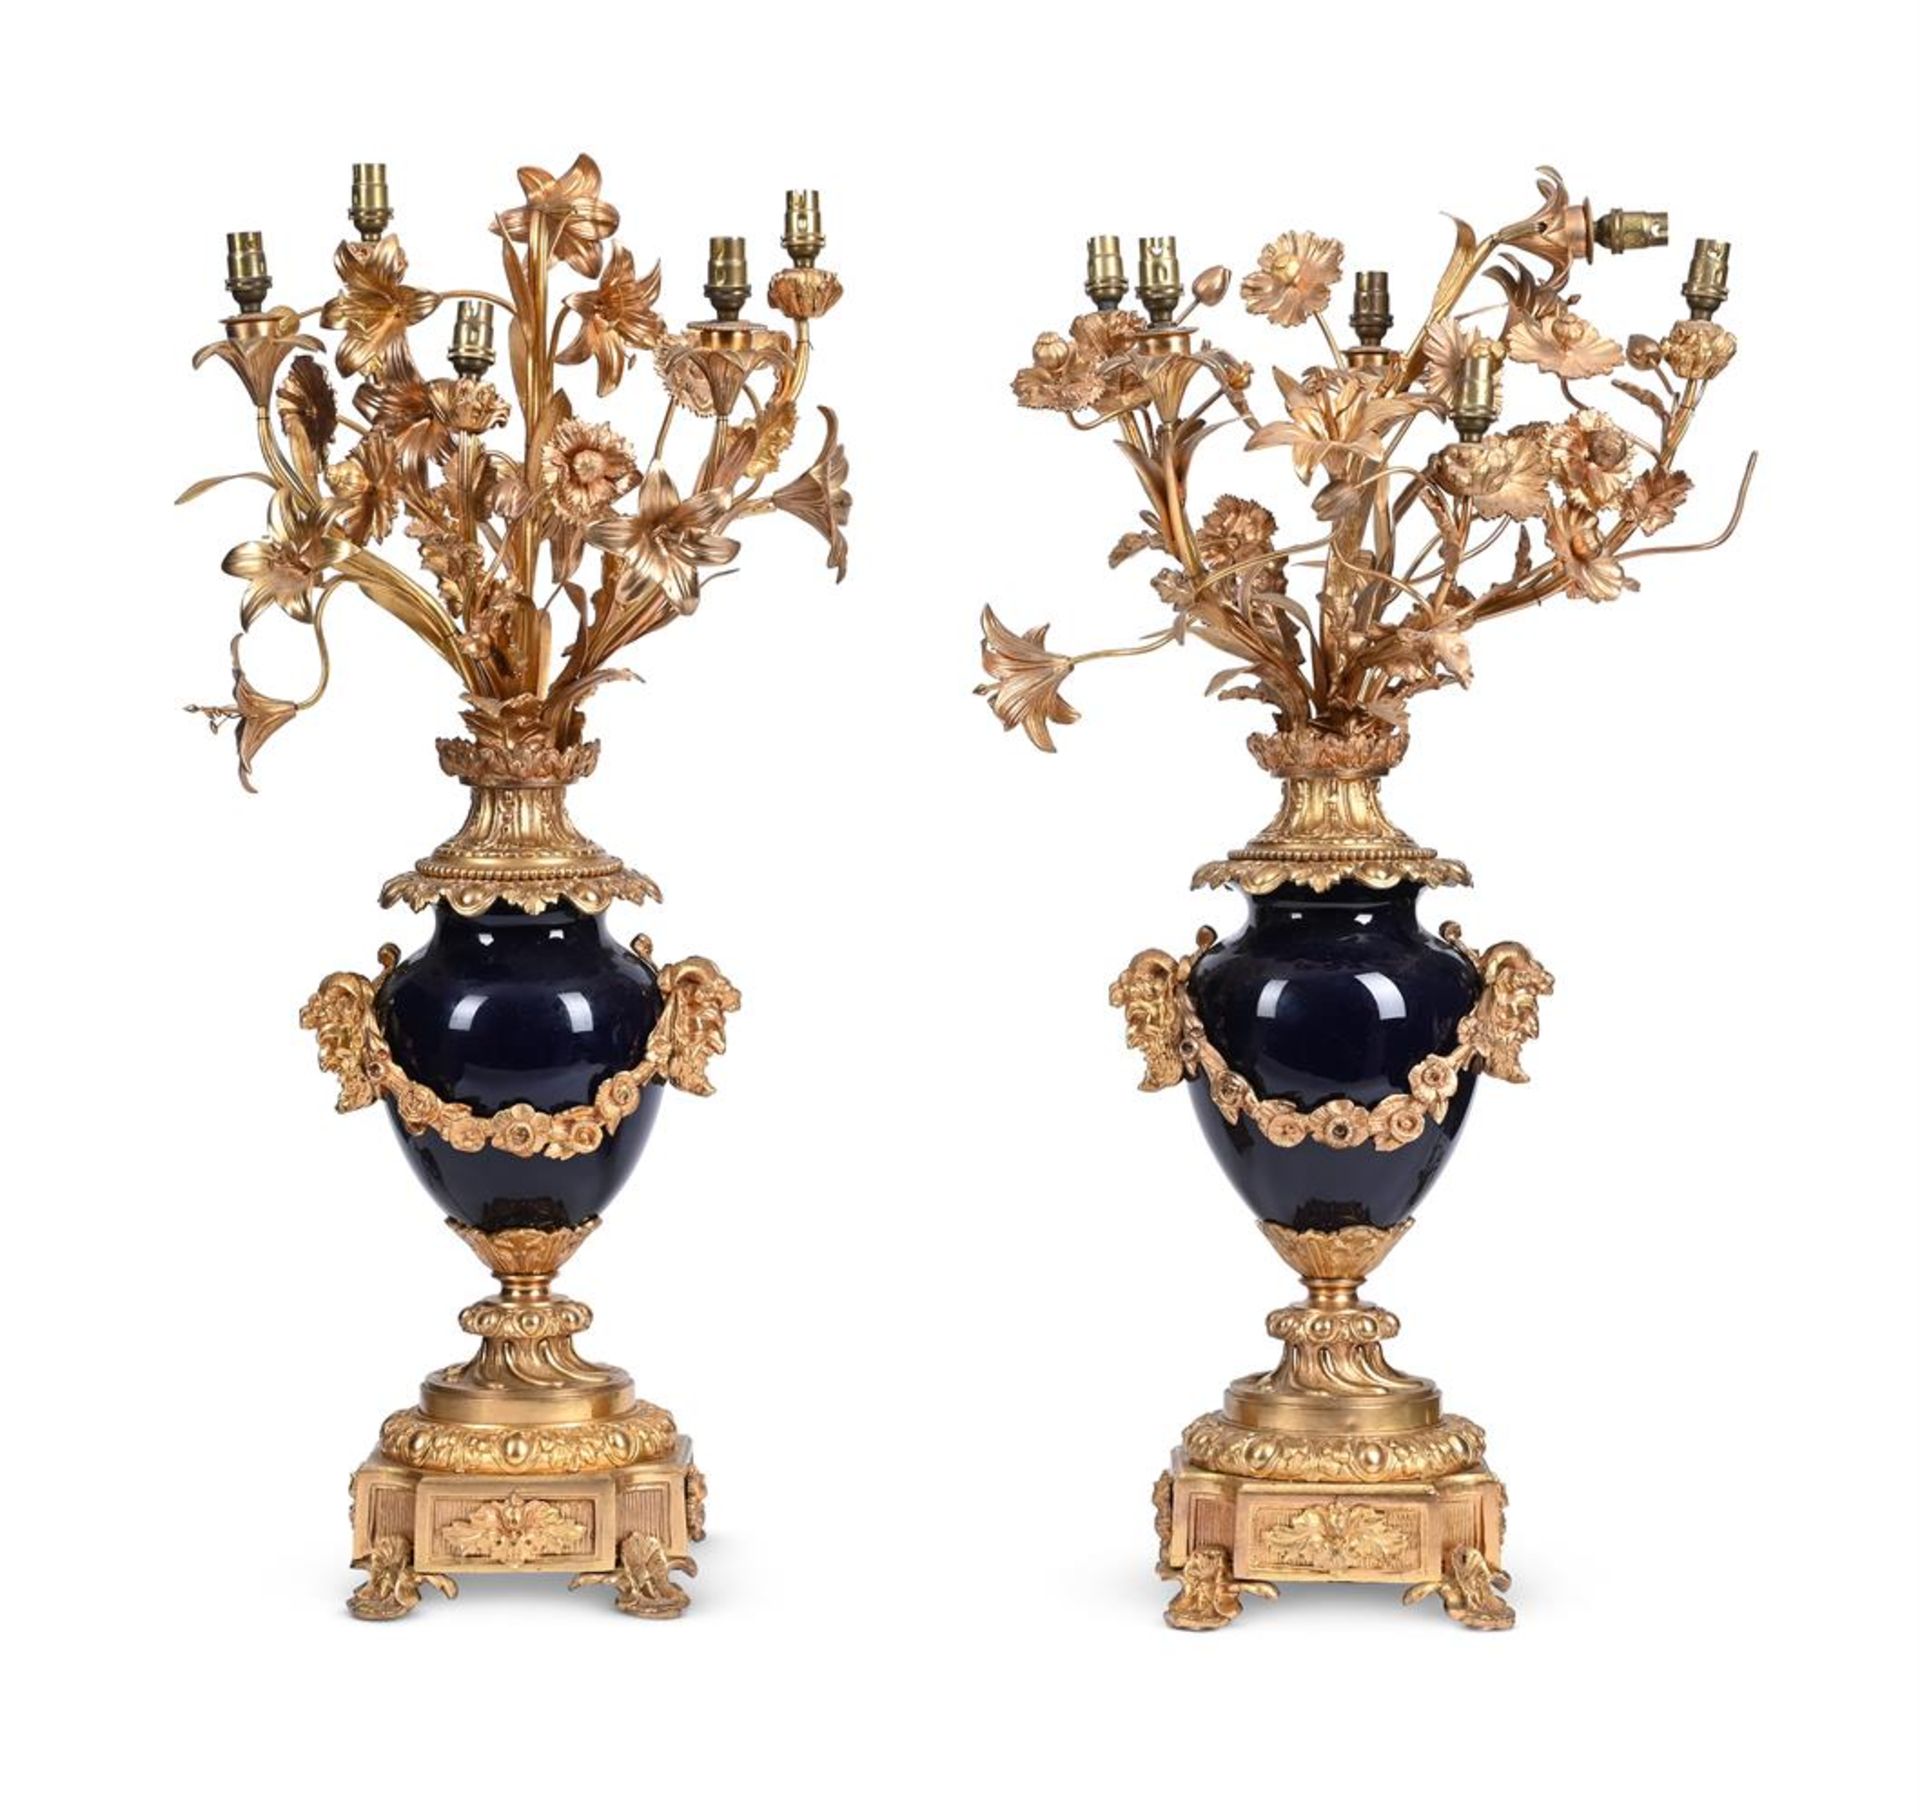 A LARGE PAIR OF FRENCH ORMOLU CANDELABRA, LATE 19TH OR EARLY 20TH CENTURY - Image 2 of 3